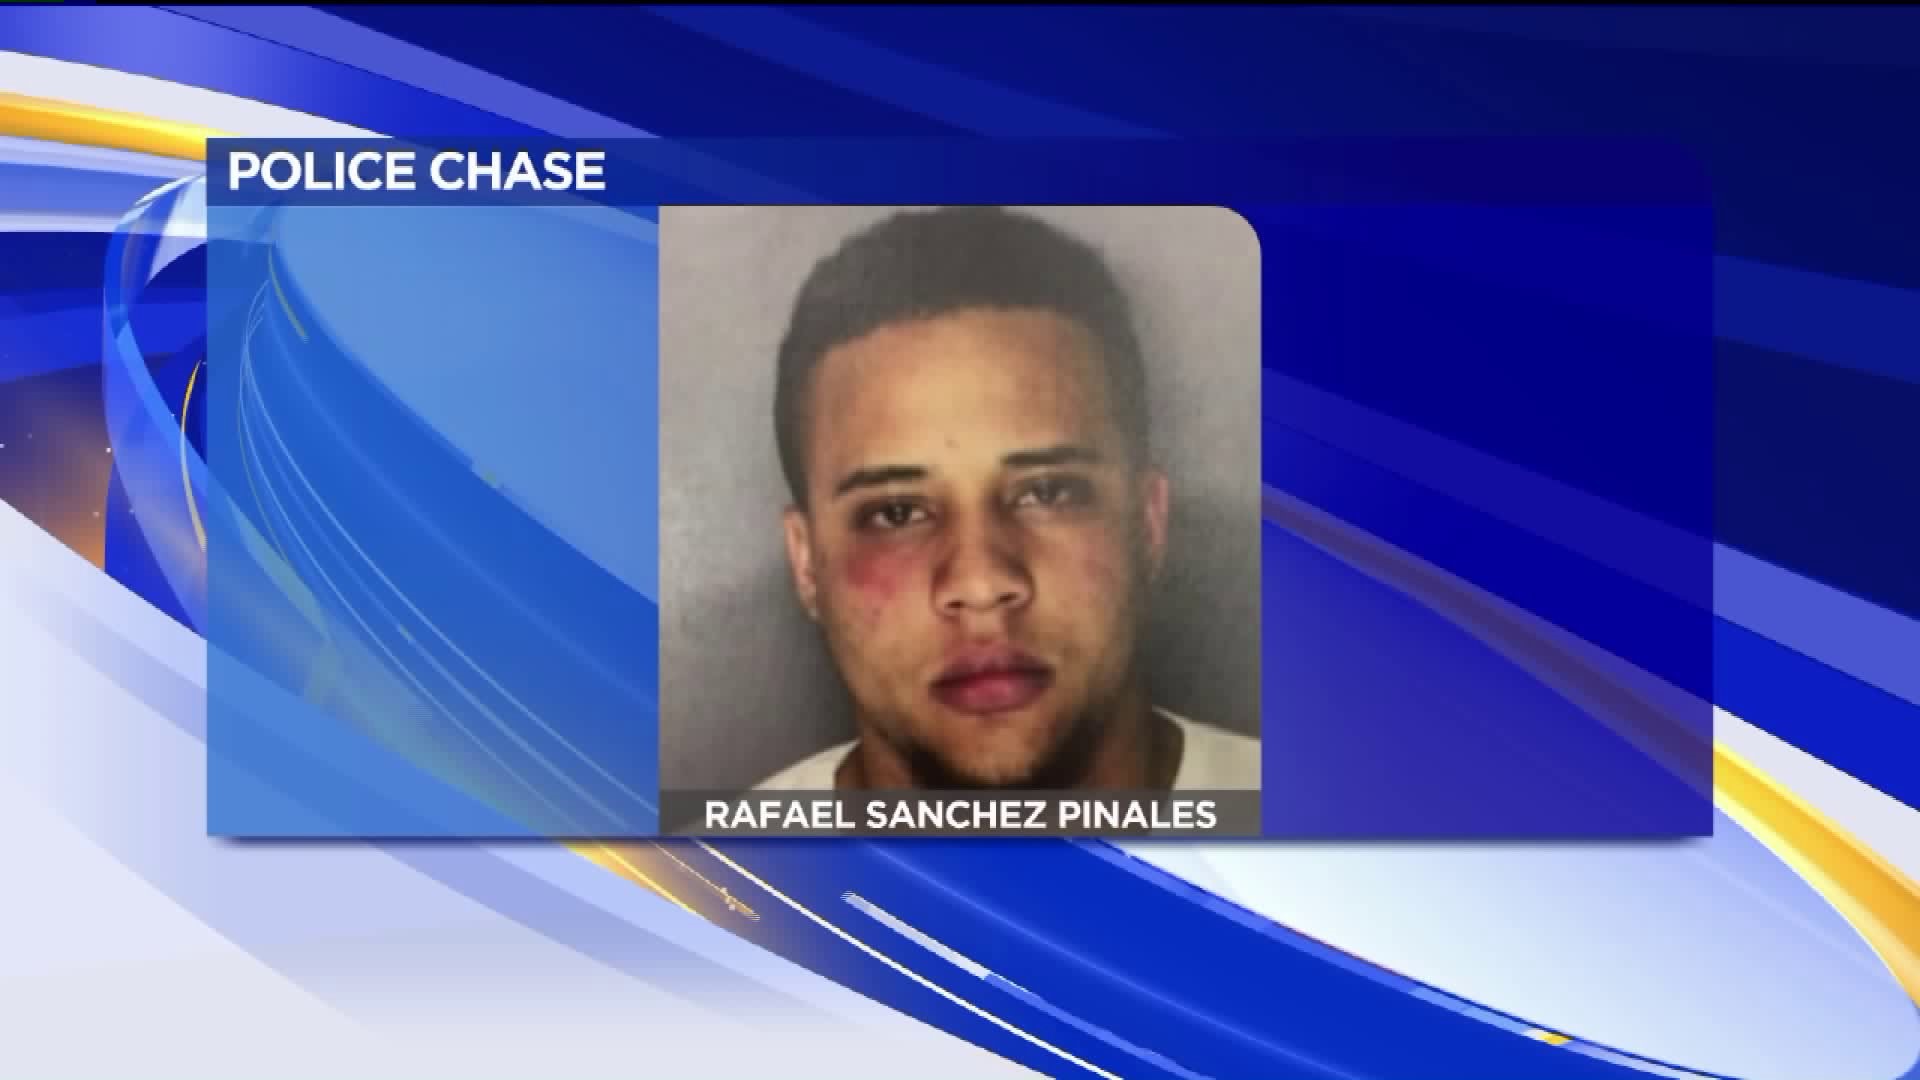 Driver Charged Following Police Chase in Hazleton